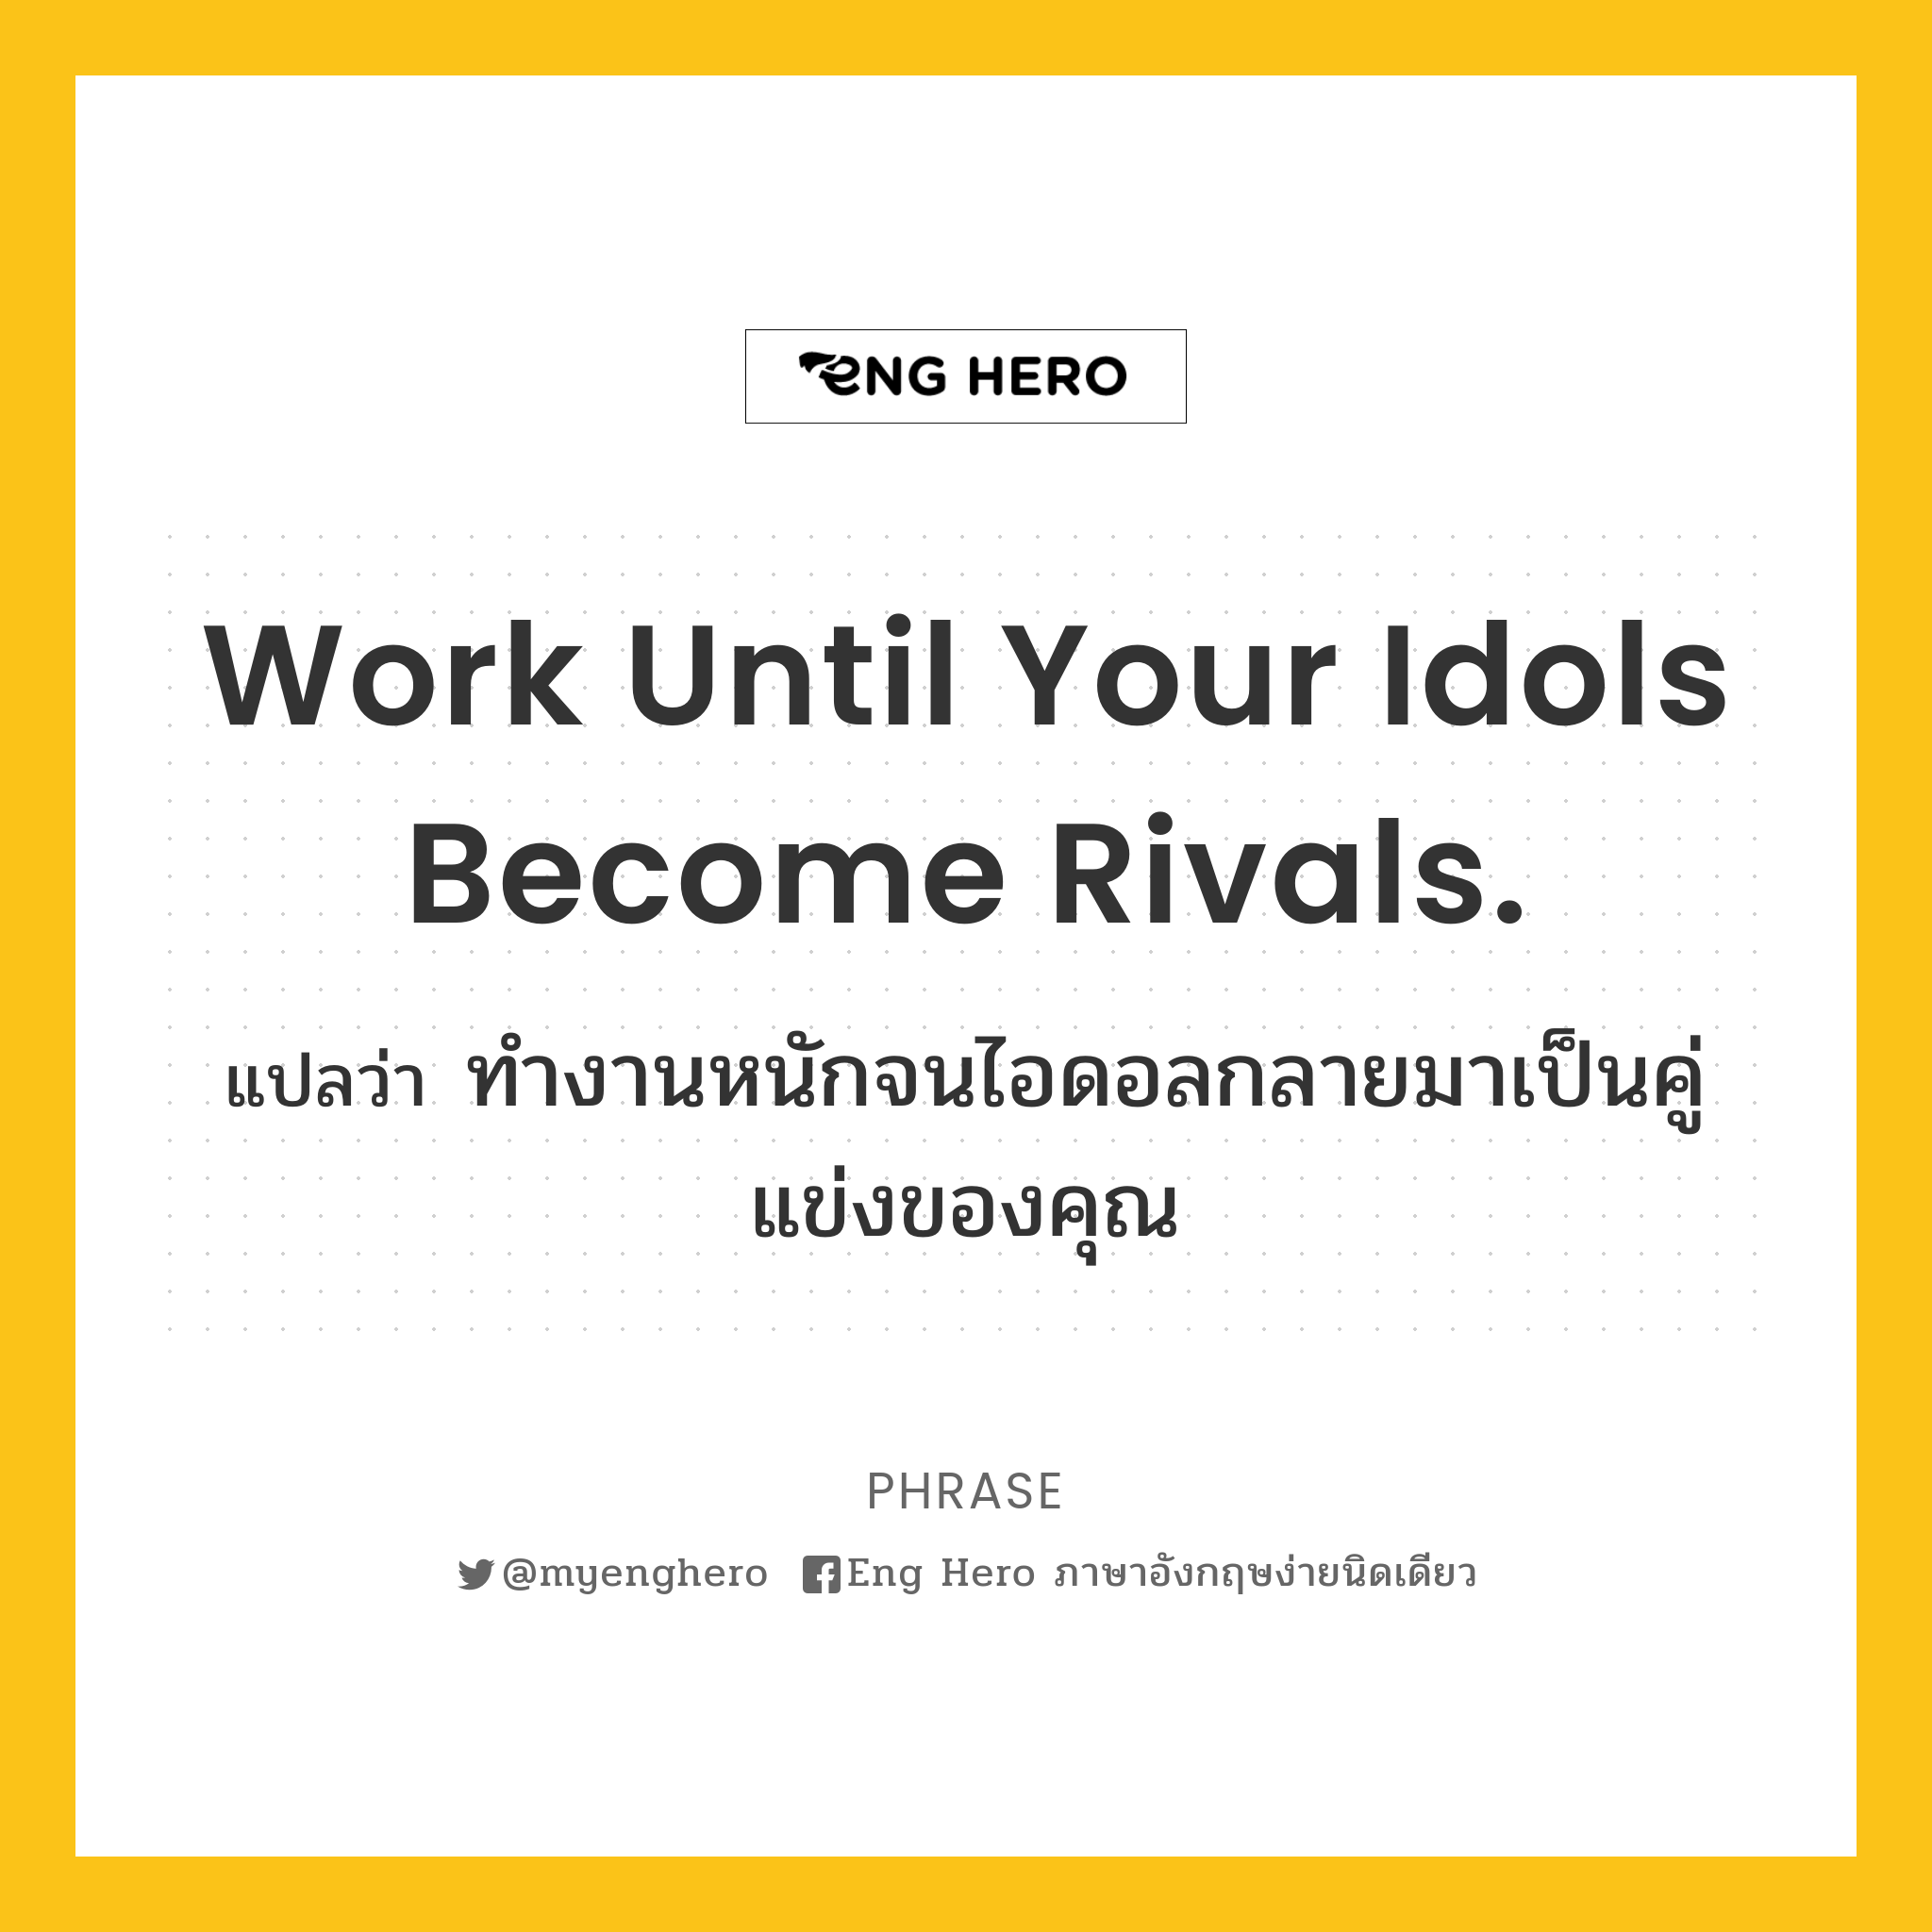 Work until your idols become Rivals.